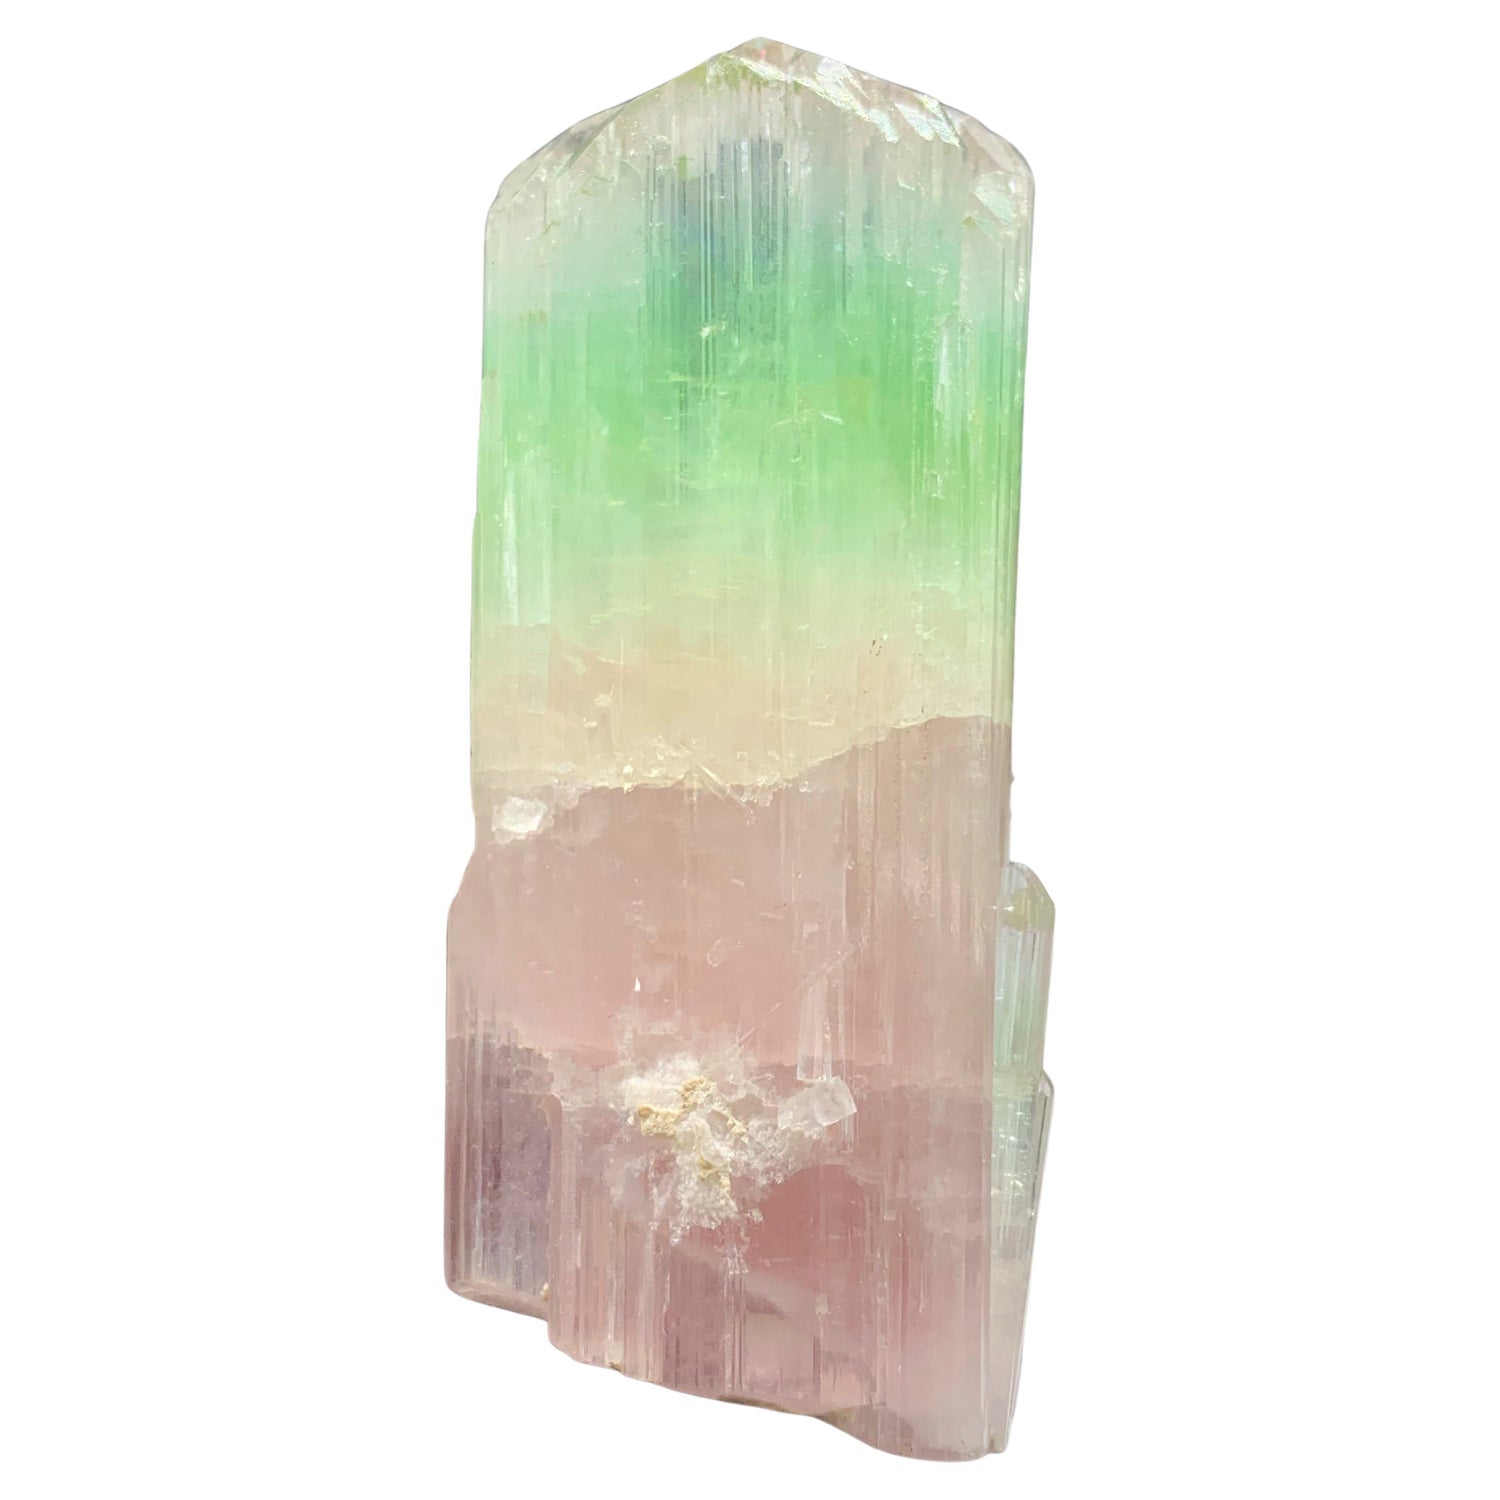 64.25 Carat Sublime Tourmaline Small Crystals Specimen from Afghanistan For  Sale at 1stDibs